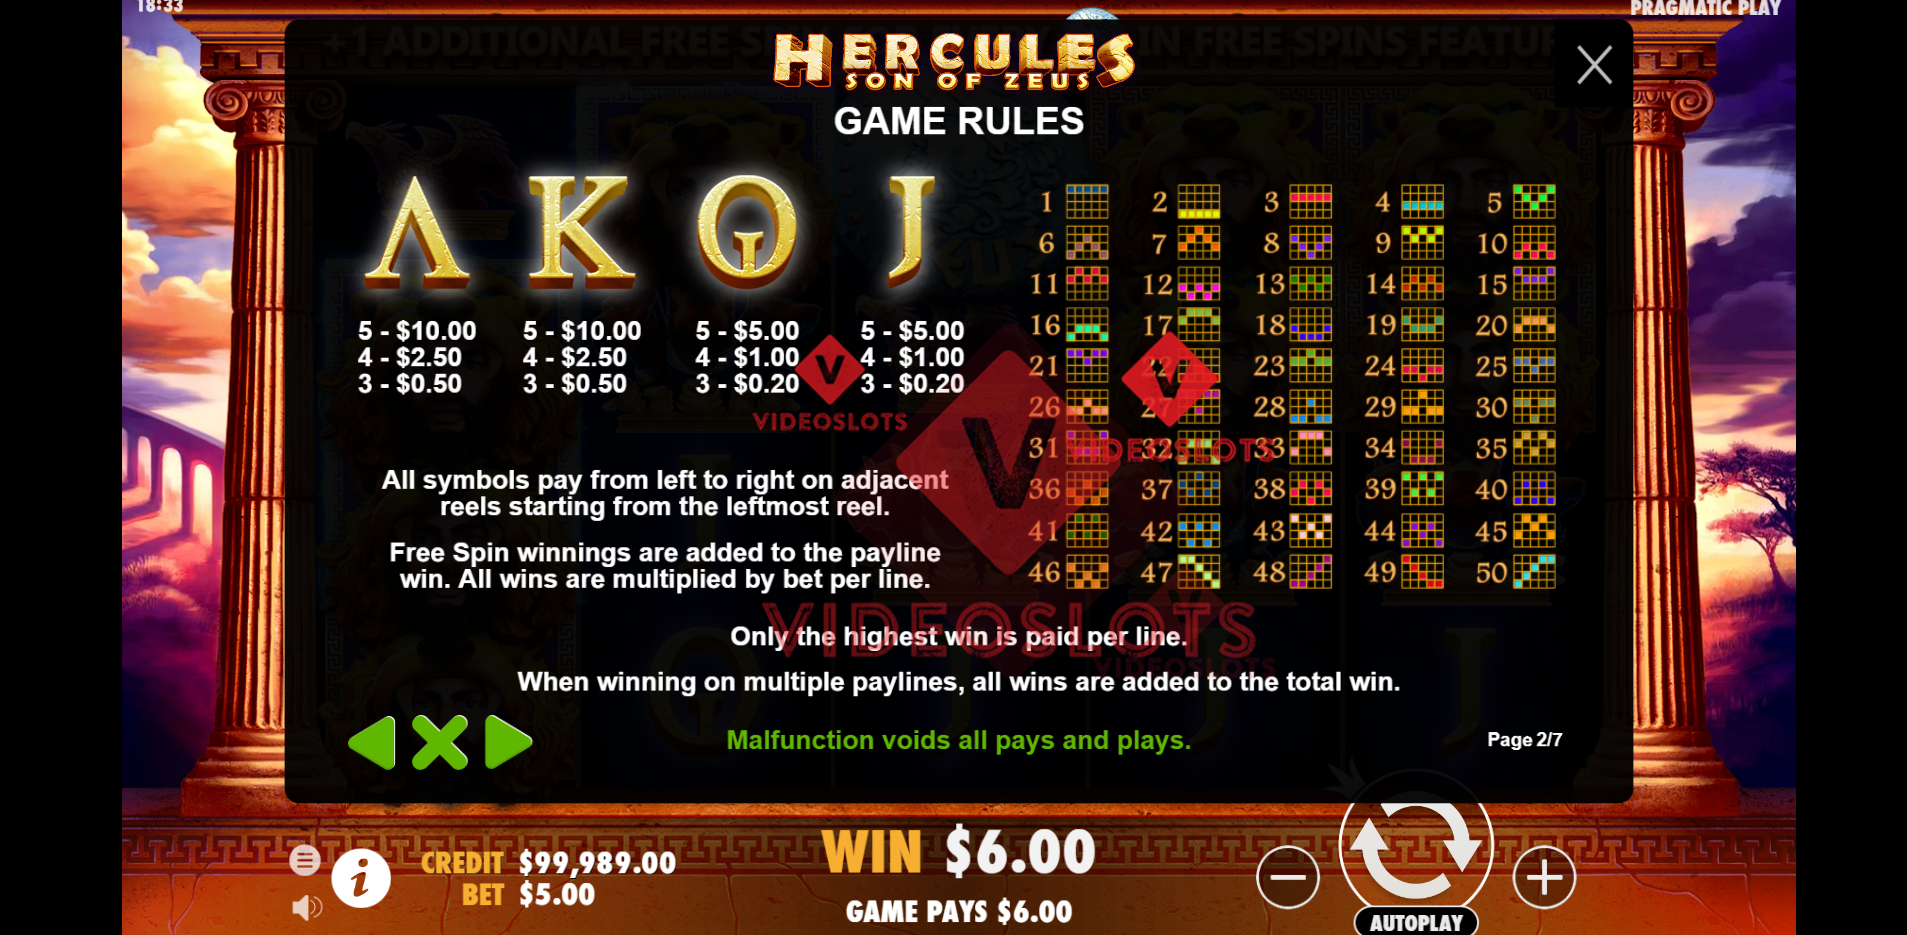 Game Rules for Hercules Son of Zeus slot by Pragmatic Play